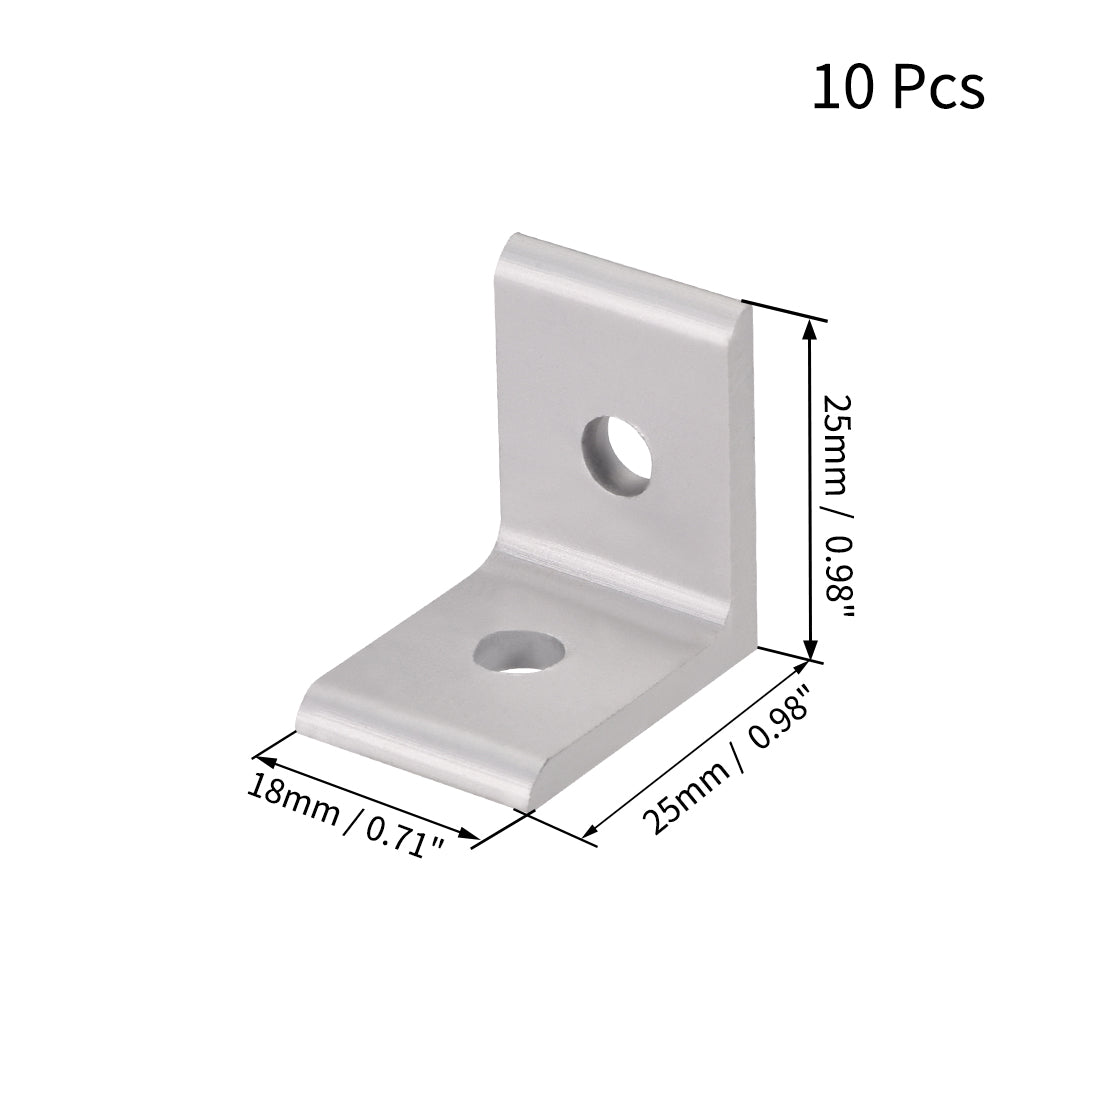 uxcell Uxcell Inside Corner Bracket for 2020 Series Aluminum Extrusion Profile with Slot 6mm, 10 Pcs